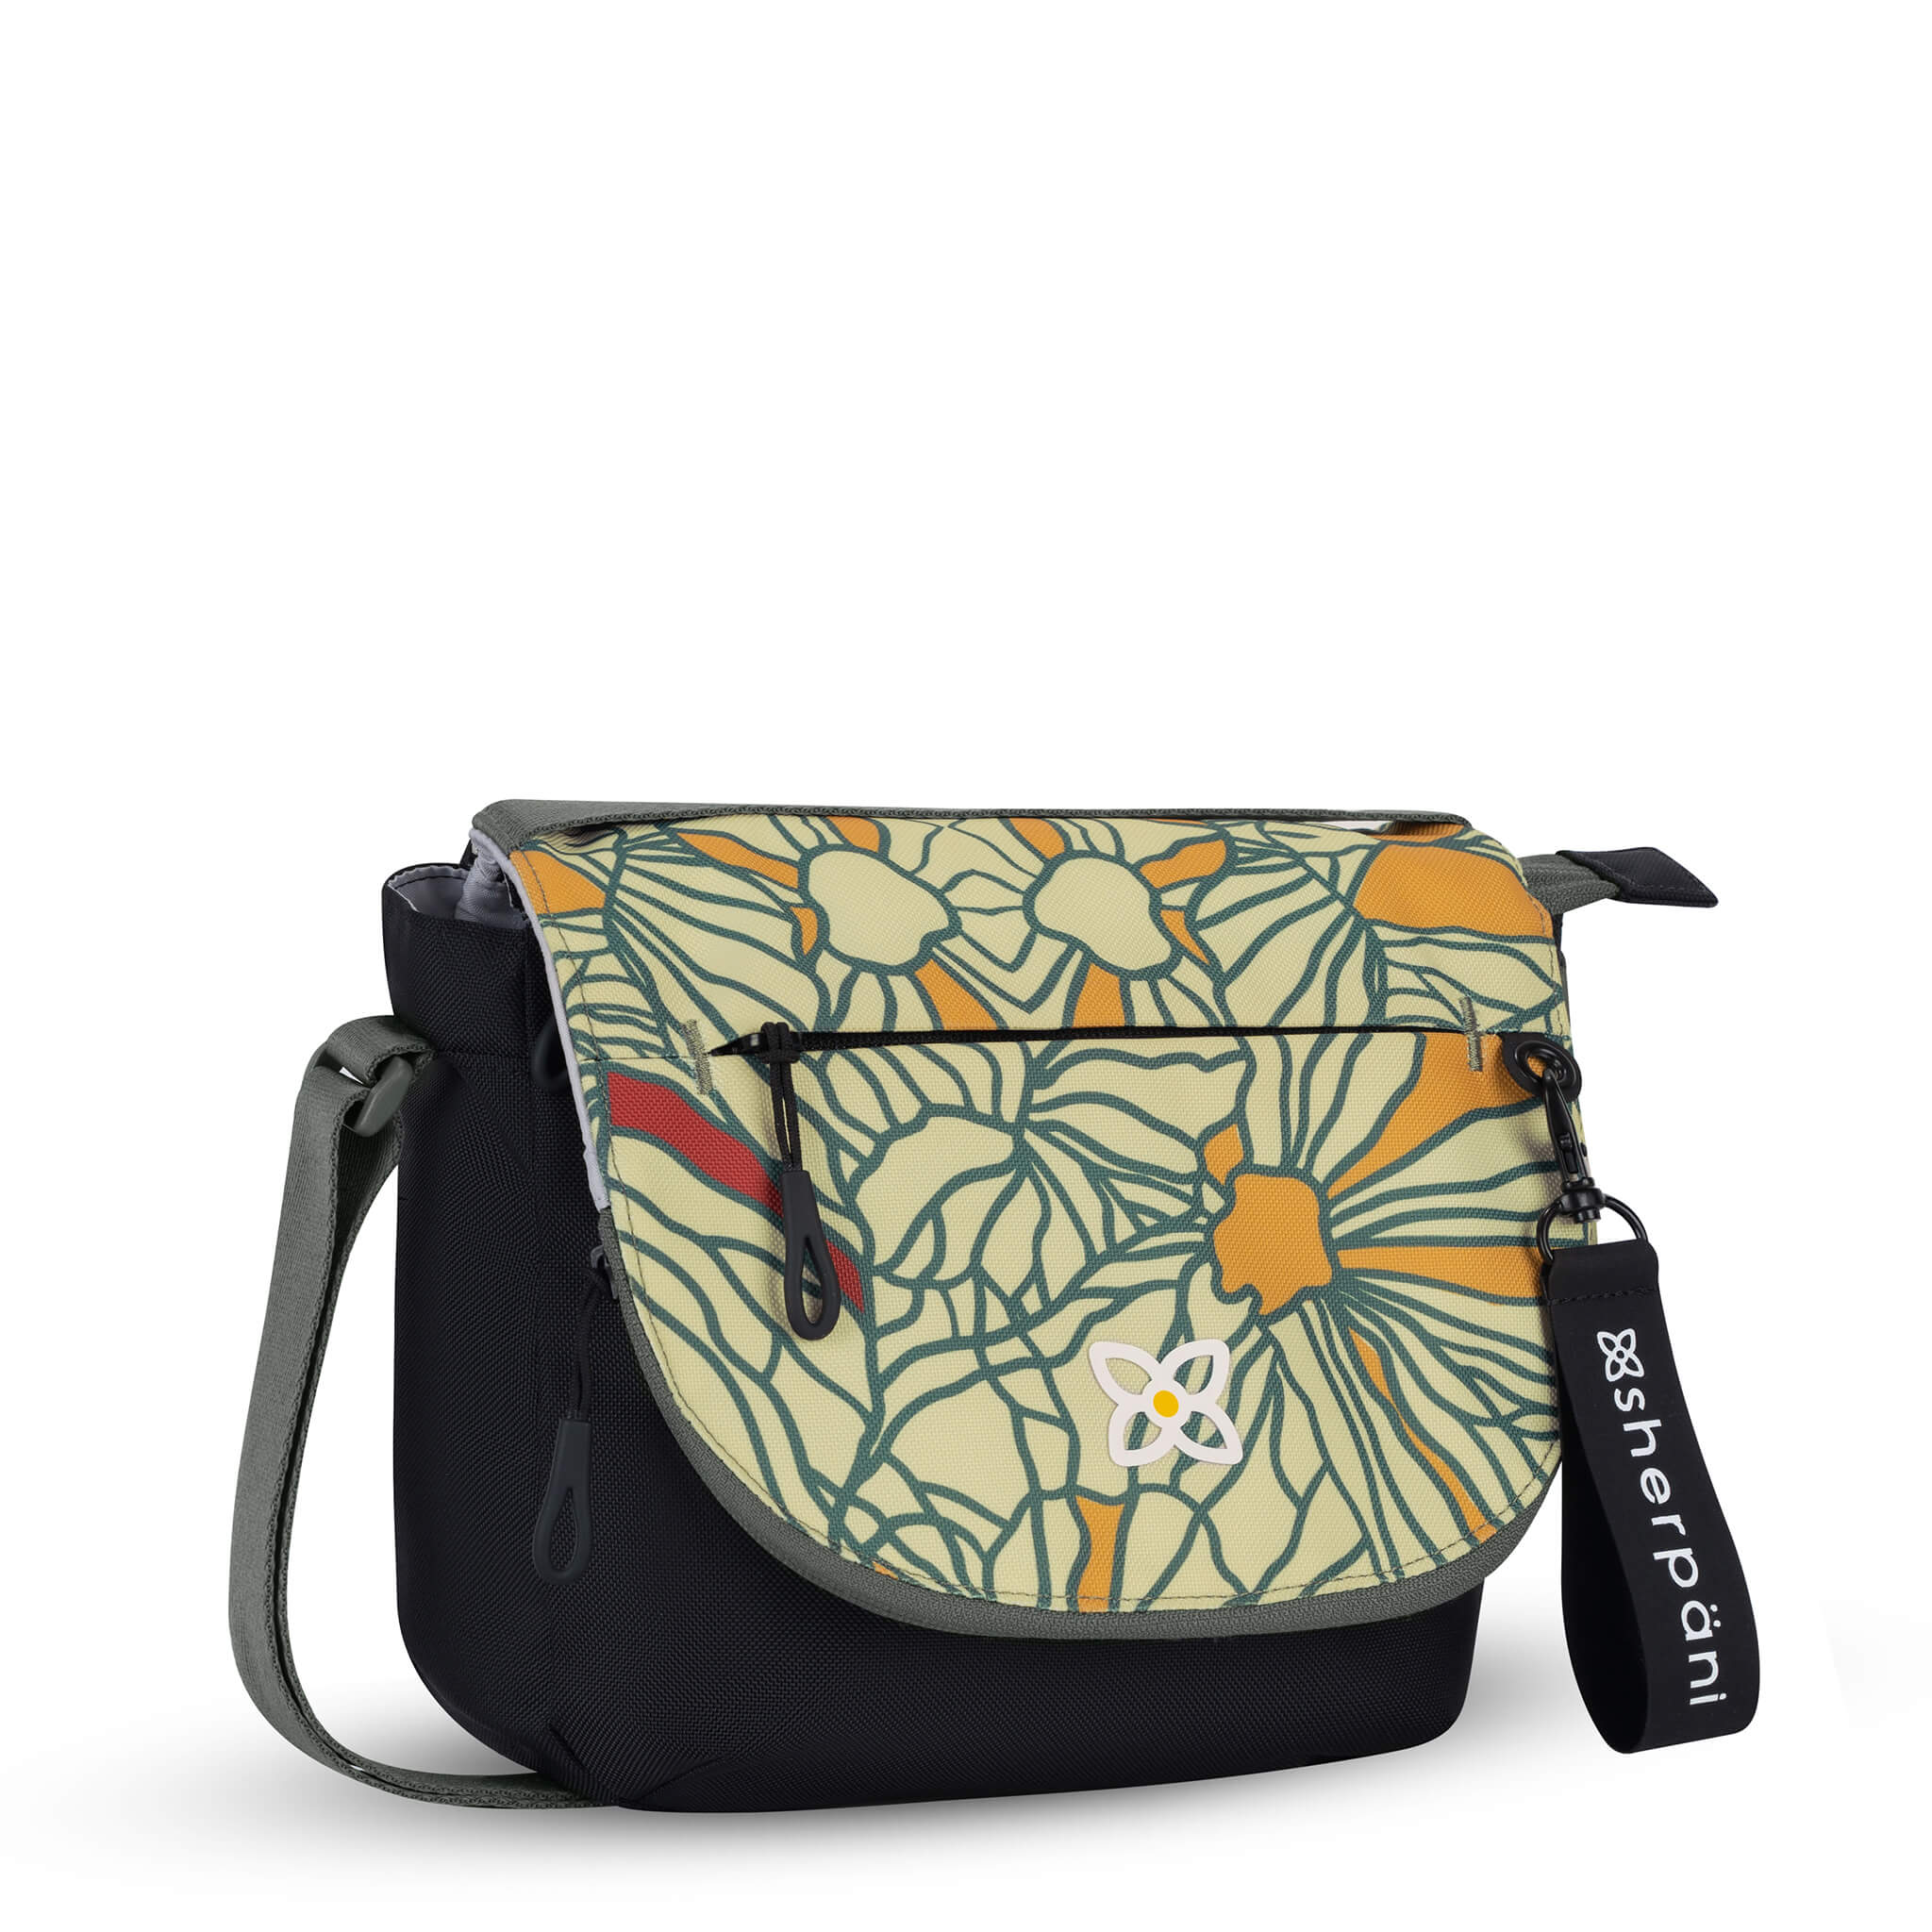 Angled front view of Sherpani messenger satchel bag, the Milli in Fiori. Milli features include an adjustable crossbody strap, front zipper pocket, brimmed zipper pocket, detachable keychain, magnetic closure, RFID security and multiple internal pockets for organization. The Fiori colorway is two-toned in black and a floral pattern with red accents. 